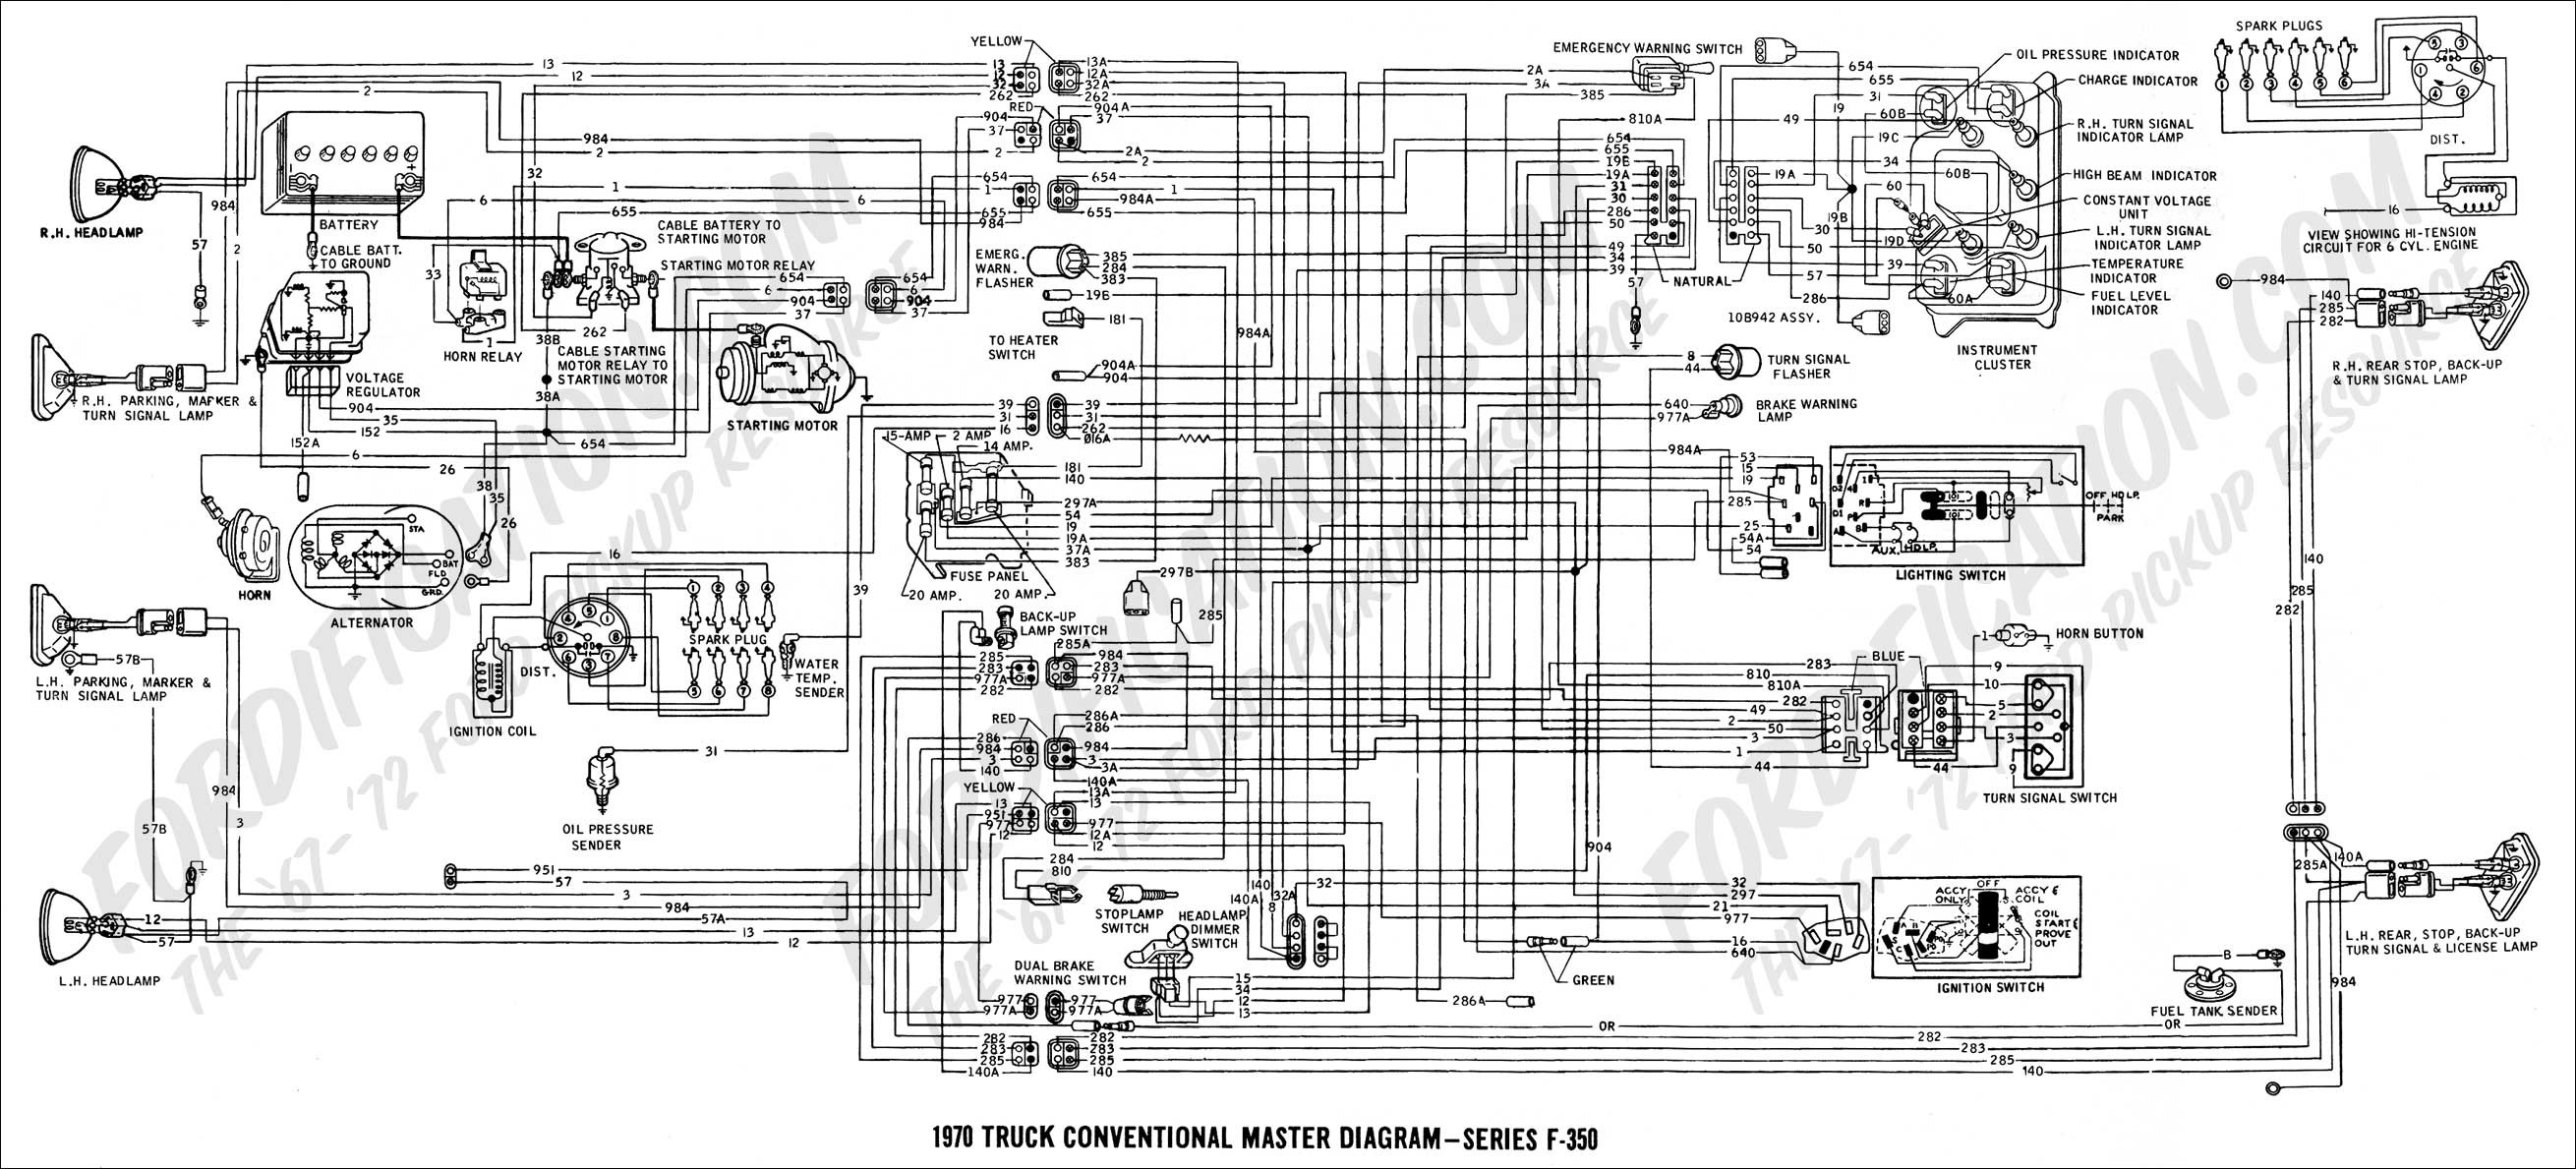 2007 ford Mustang Wiring Diagram attachment PHP attachmentid Stc 1 D for 2007 ford Of 2007 ford Mustang Wiring Diagram